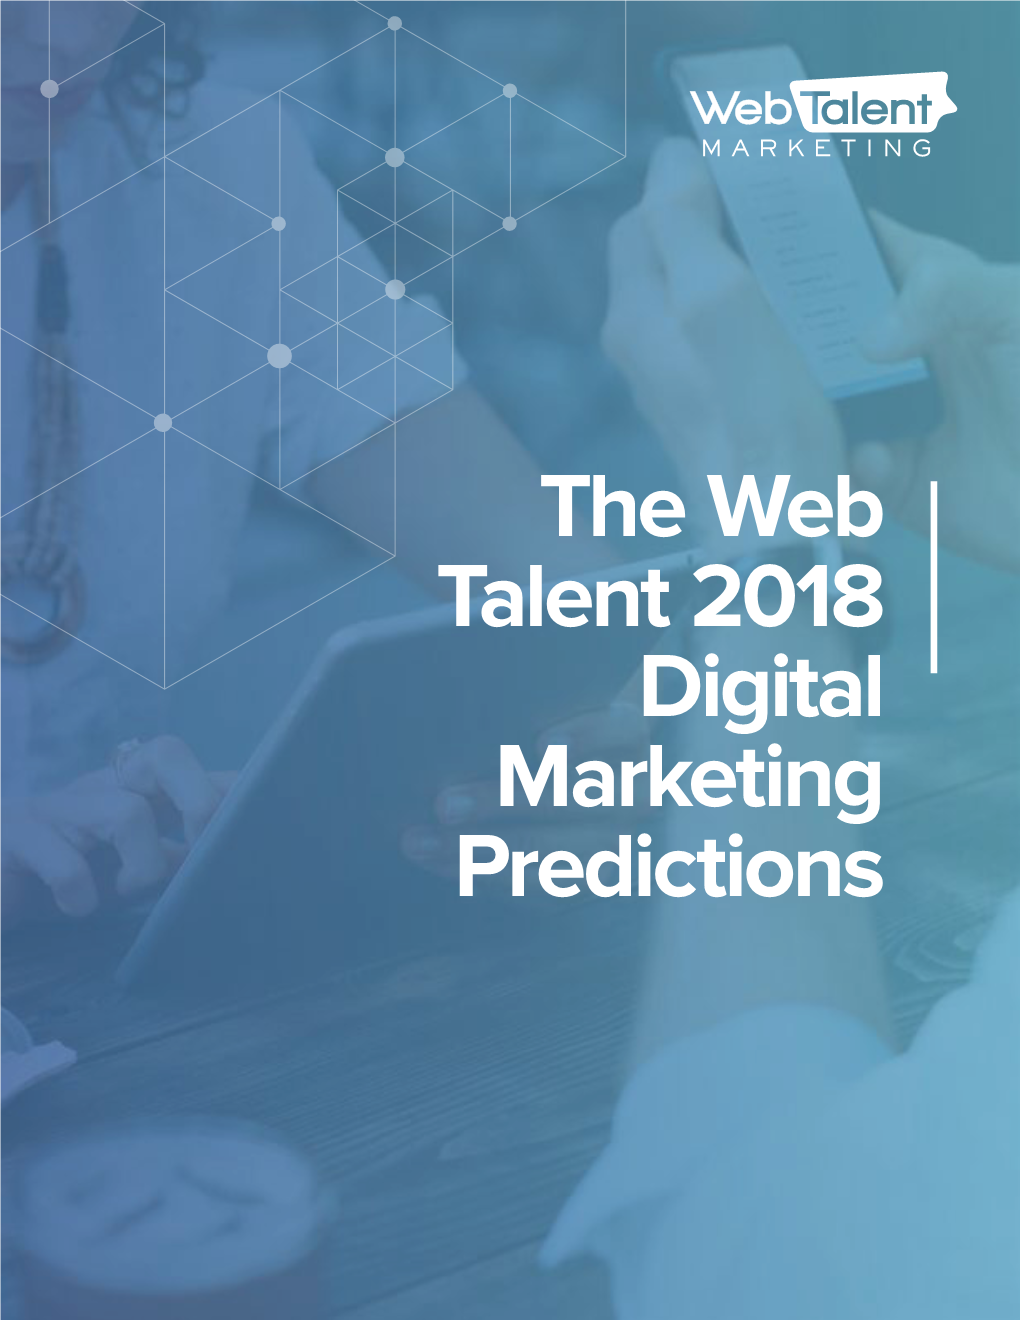 The Web Talent 2018 Digital Marketing Predictions Think About 2017 As It Relates to the Discipline Led Methodology, Poor Training, Or Misdirec- of Marketing